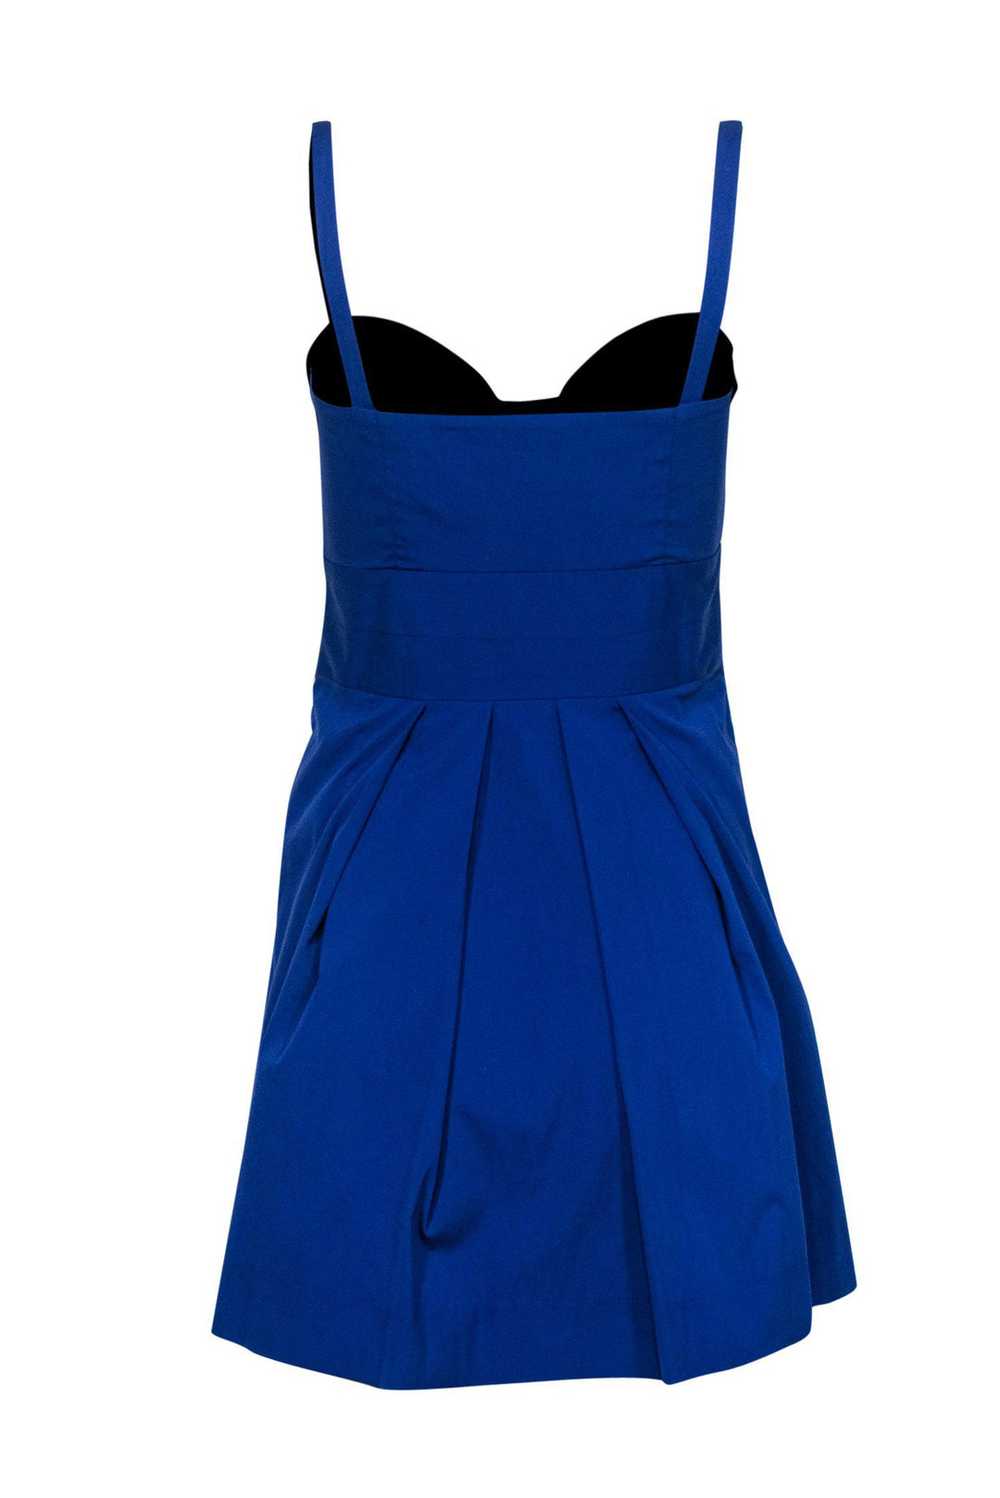 Milly - Royal Blue Fit & Flare Dress w/ Bow Sz 2 - image 3